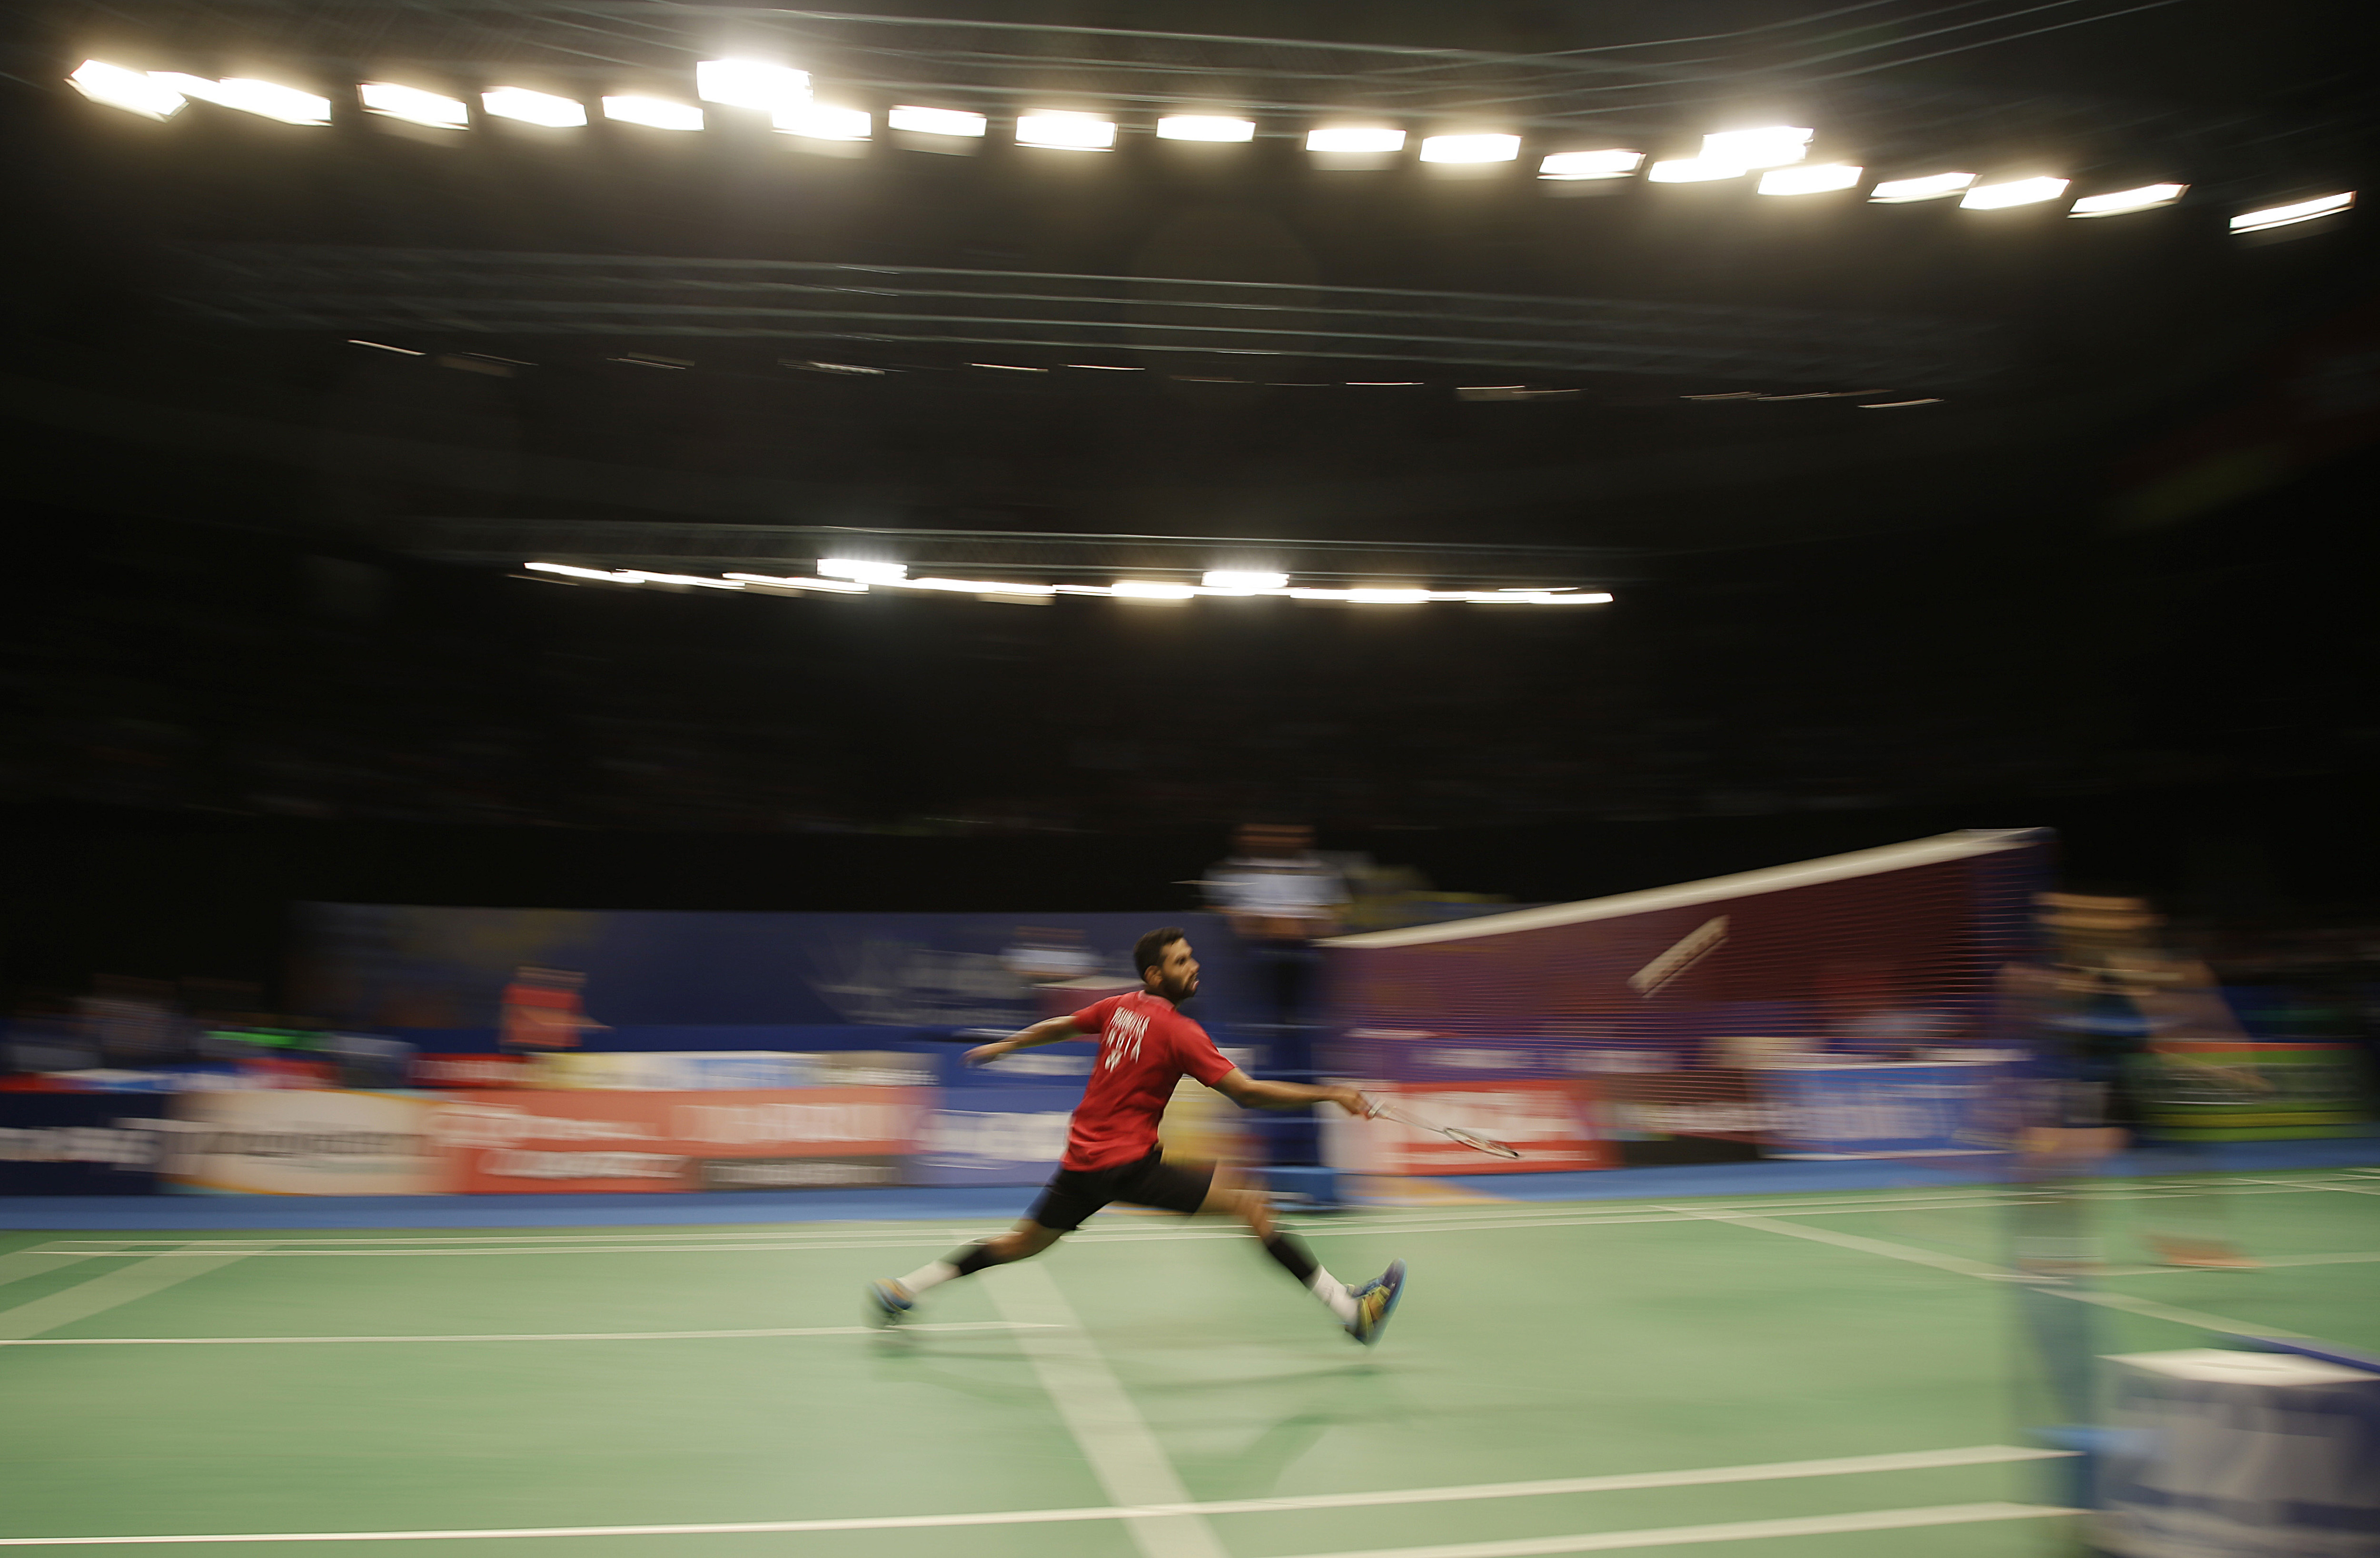 India's HS Prannoy plays against Malaysia's Lee Chong Wei during the second round of Indonesia Open badminton championship in Jakarta, Indonesia, Thursday, June 15, 2017. (AP Photo/Dita Alangkara)